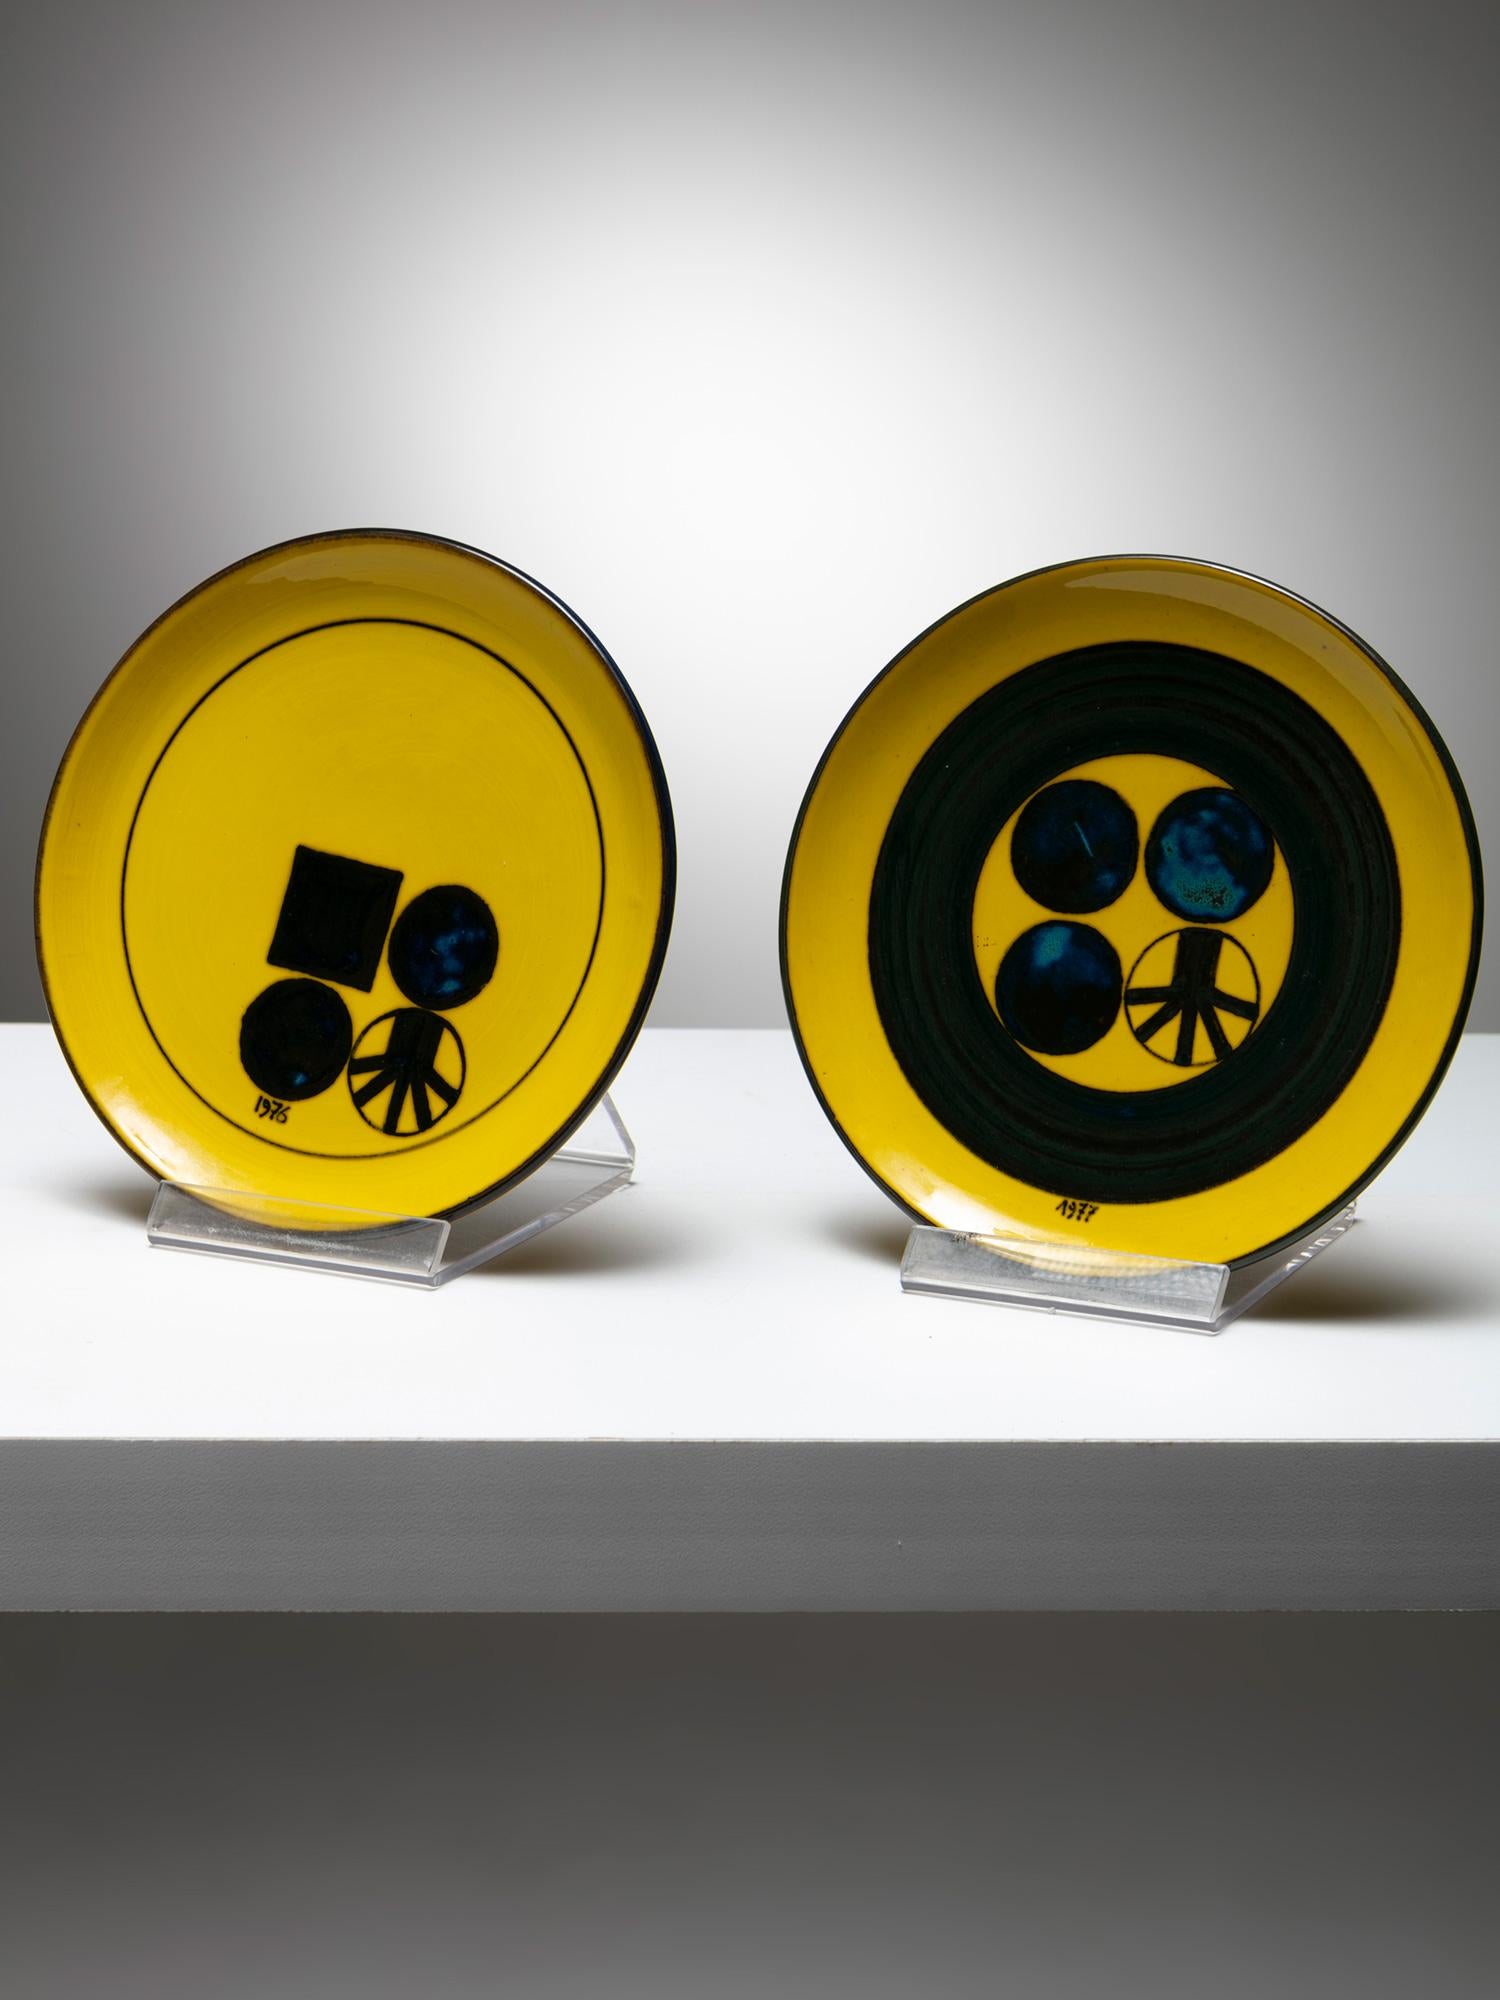 Set of six different plates designed and produced in the late 1970s as gifts.